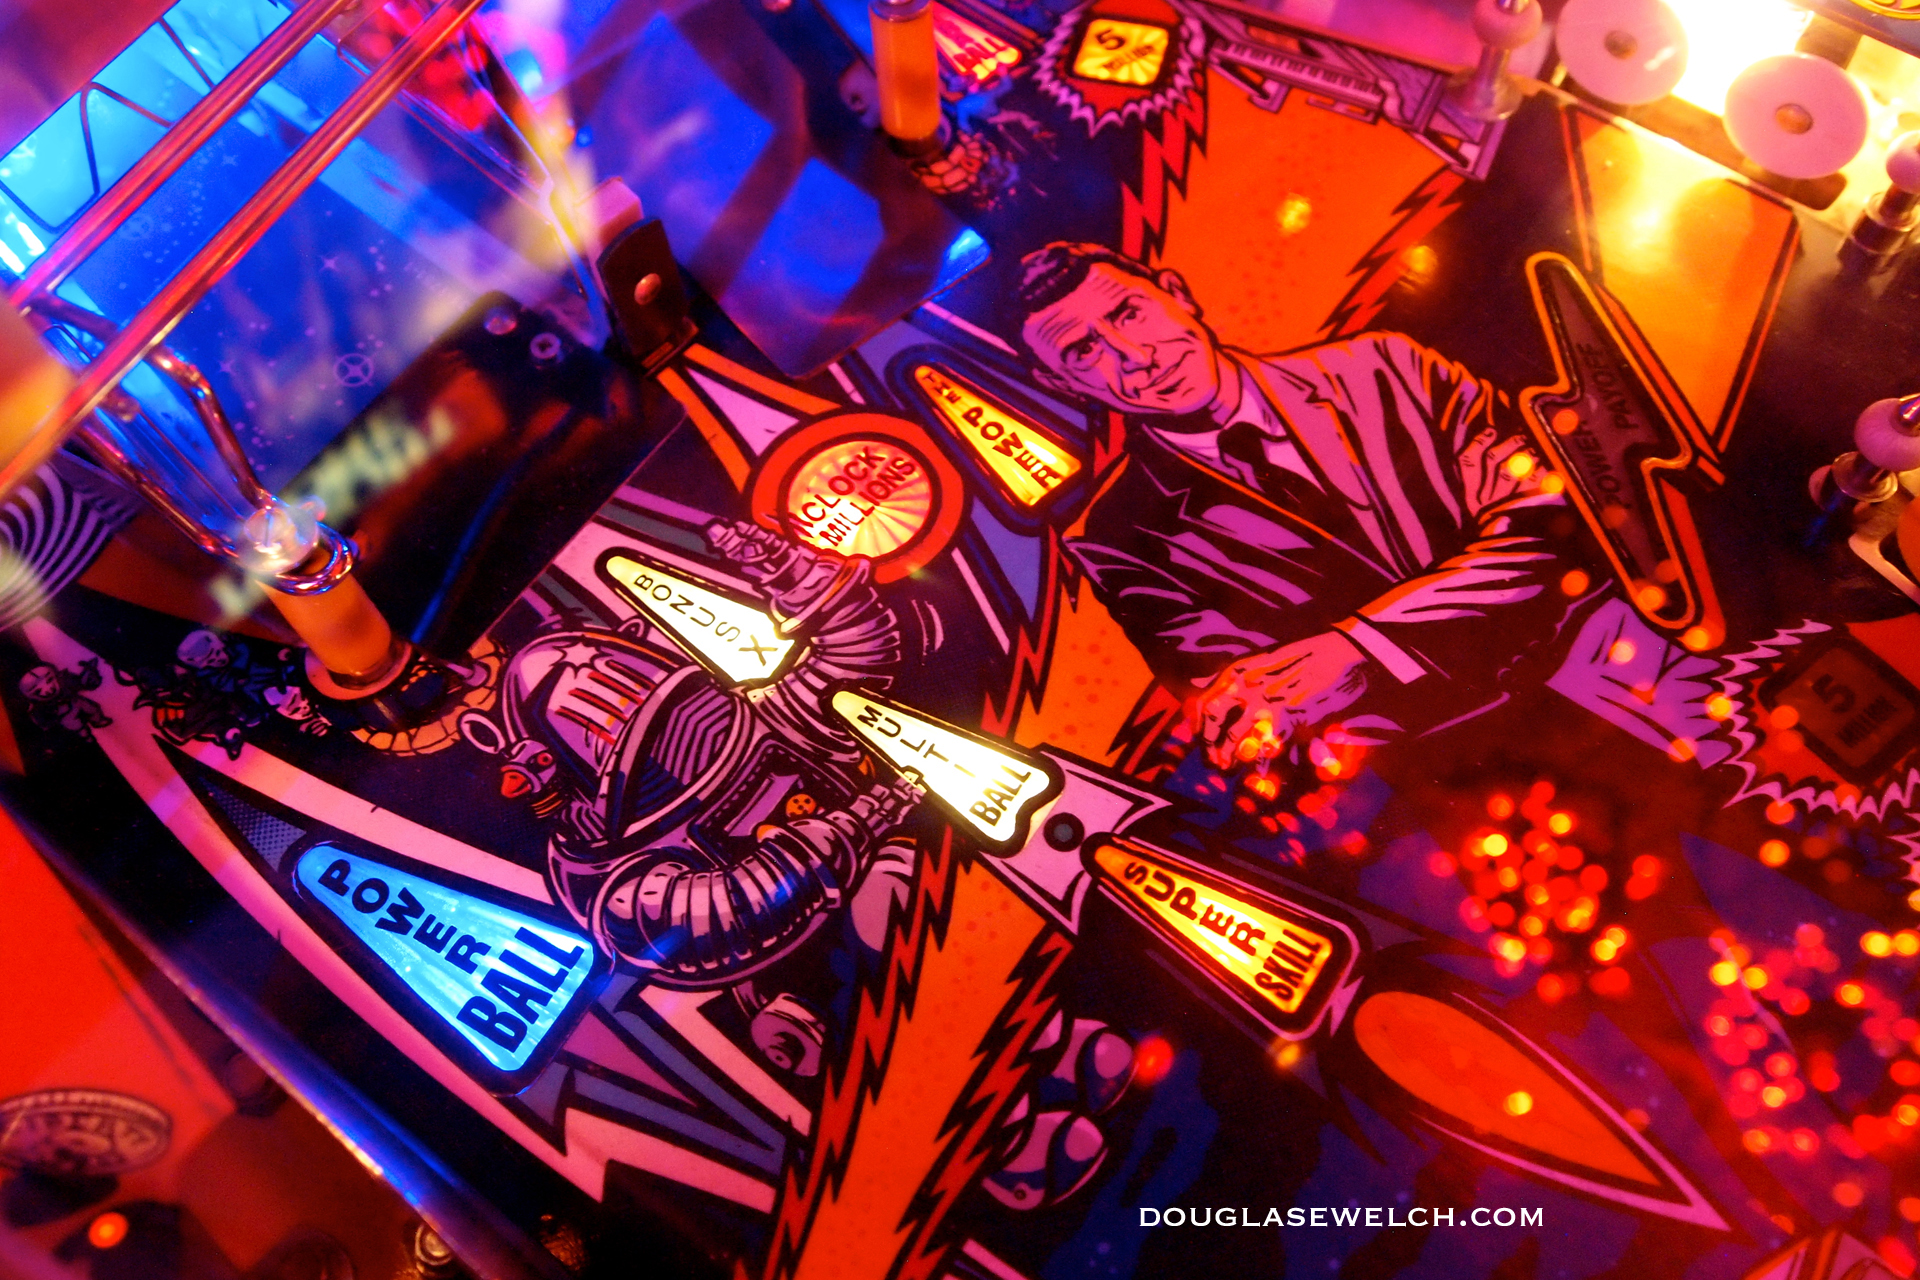 Free Pinball desktop, Tablet and Smartphone Wallpaper for March 2013